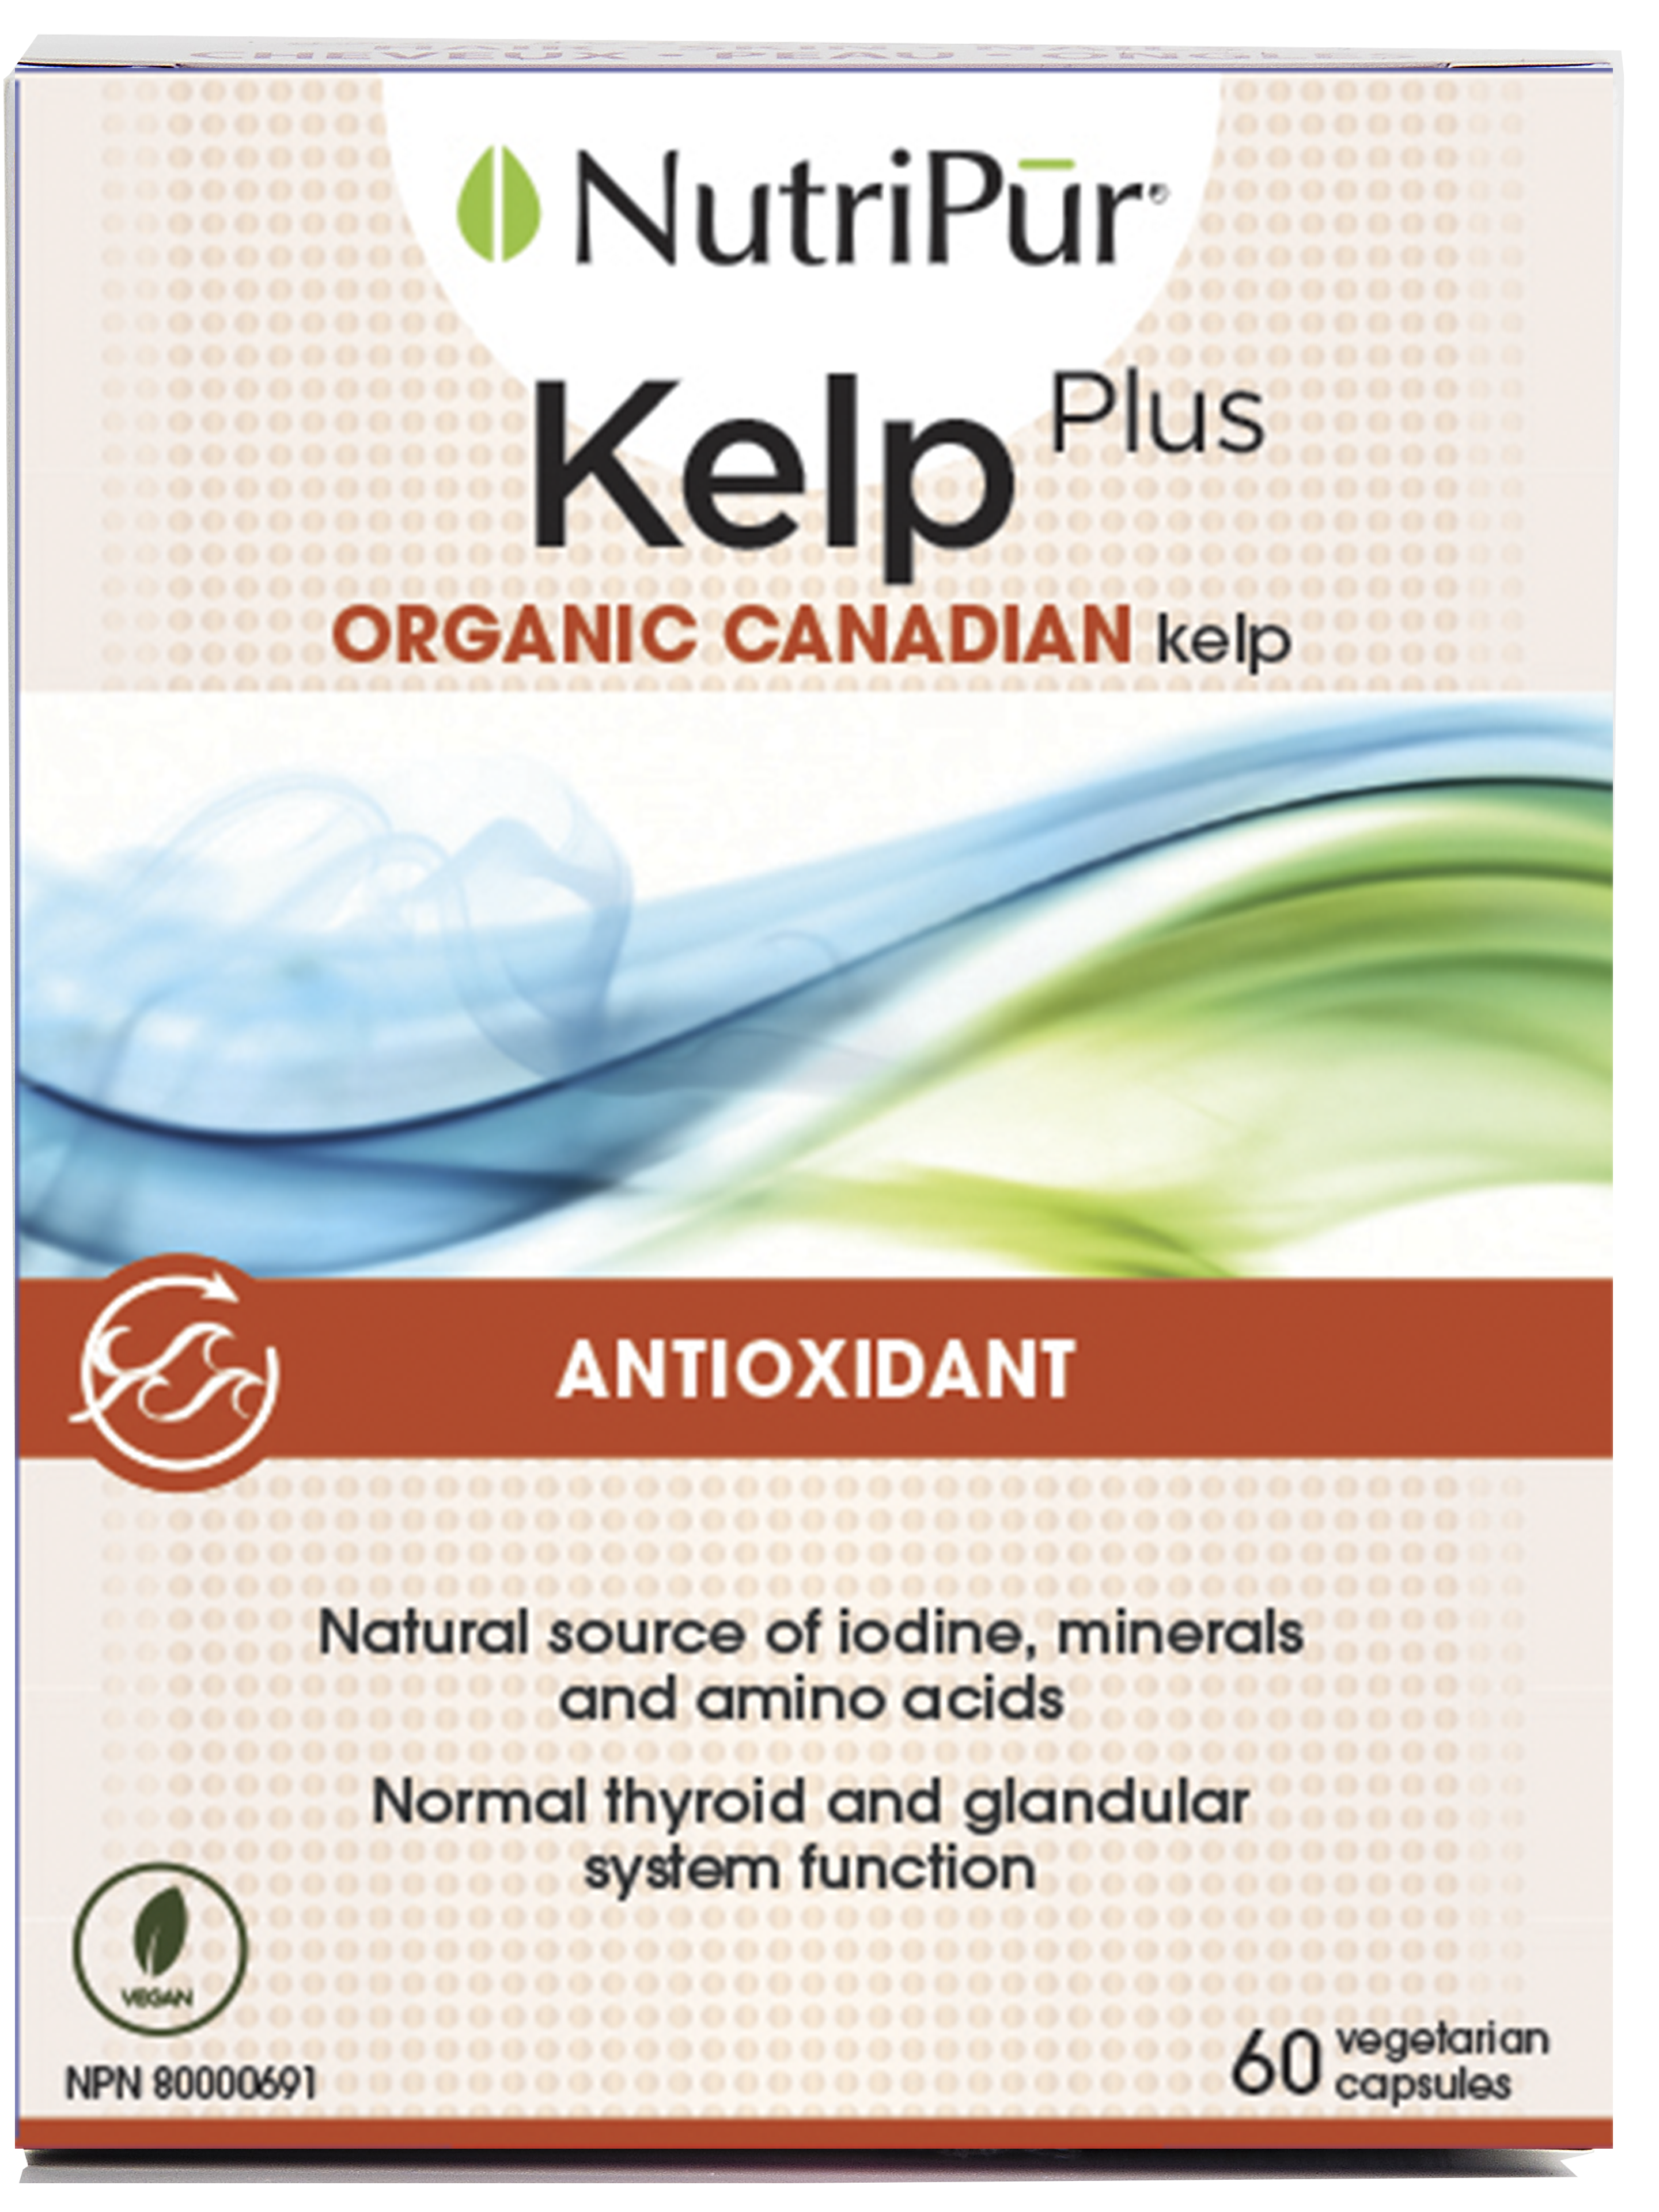 Kelp Plus - Nutripur - Antioxidnat - source of iodine, mineral and AA - normal thyroid and glandular system function - ORGANIC CANADIAN kelp